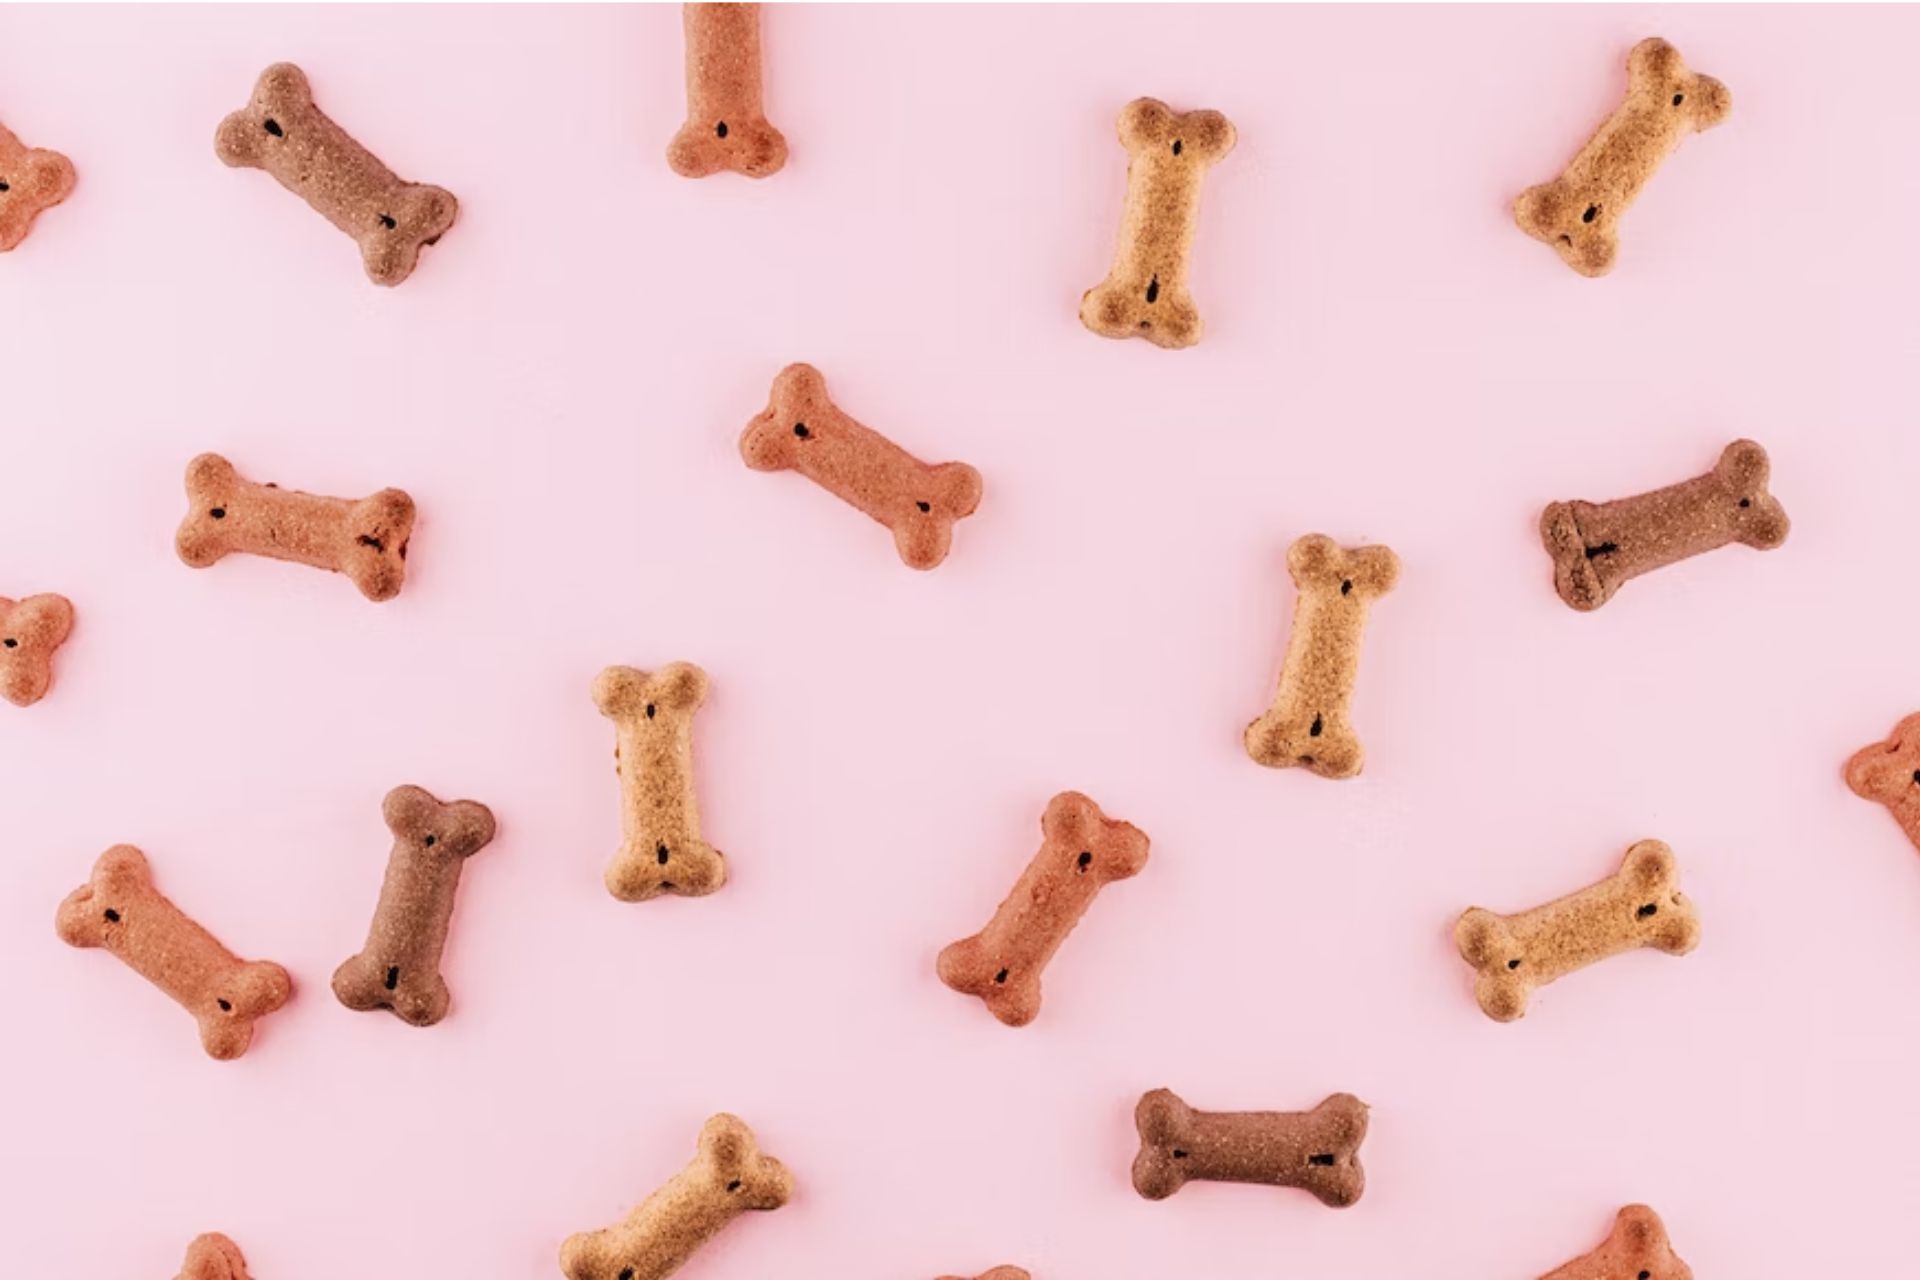 Dog treats on a pink background.